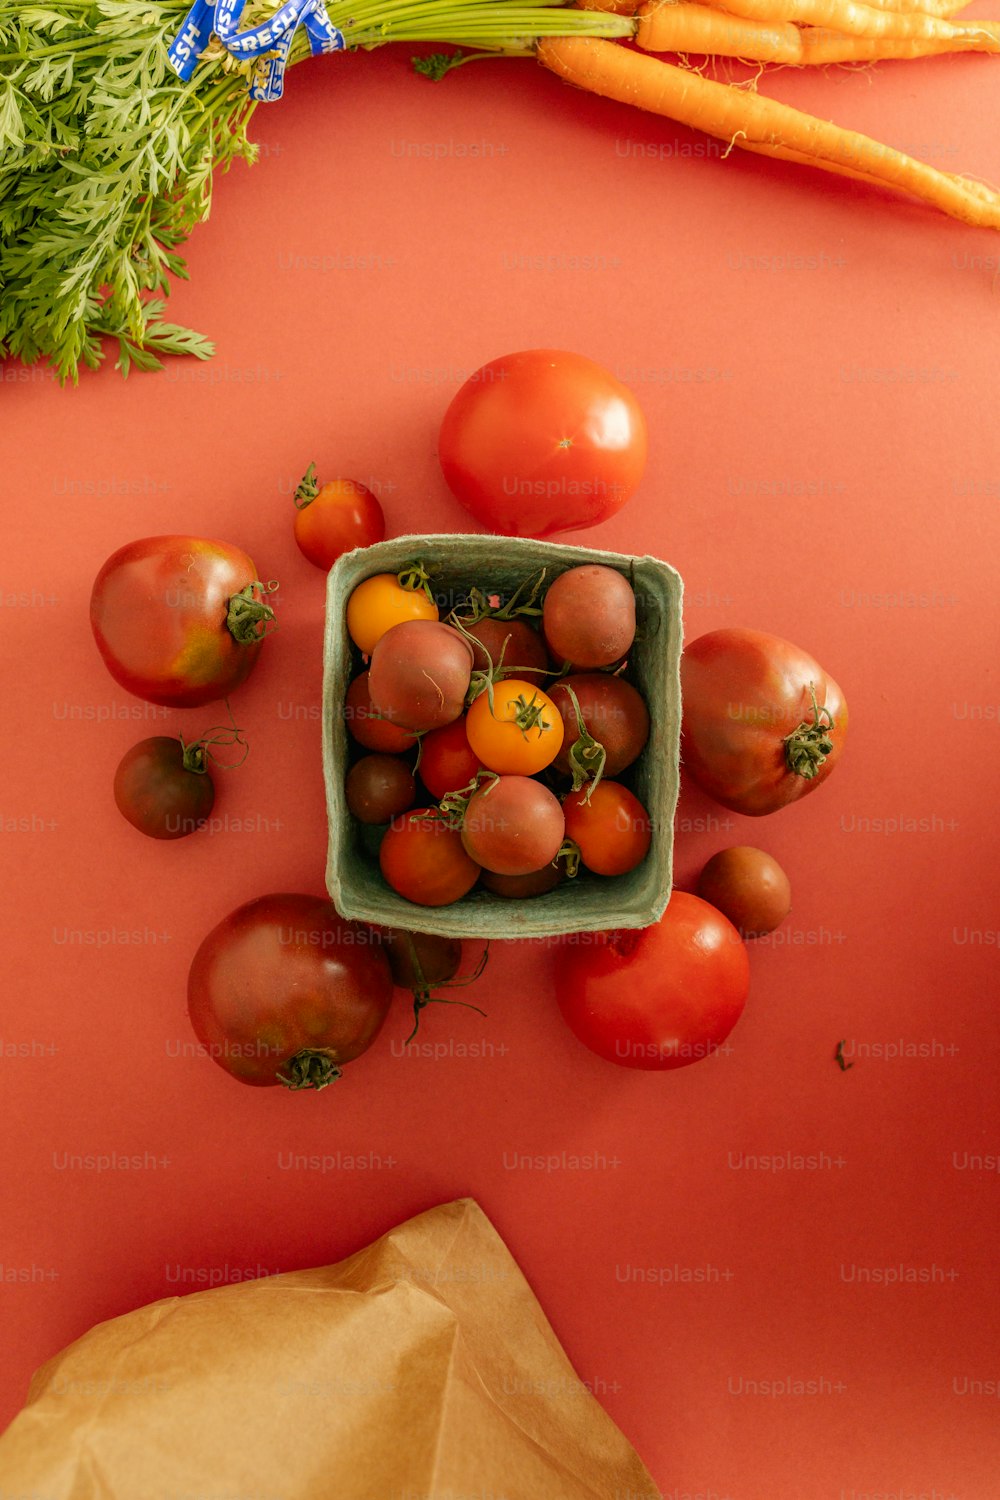 a bowl of tomatoes and carrots on a table